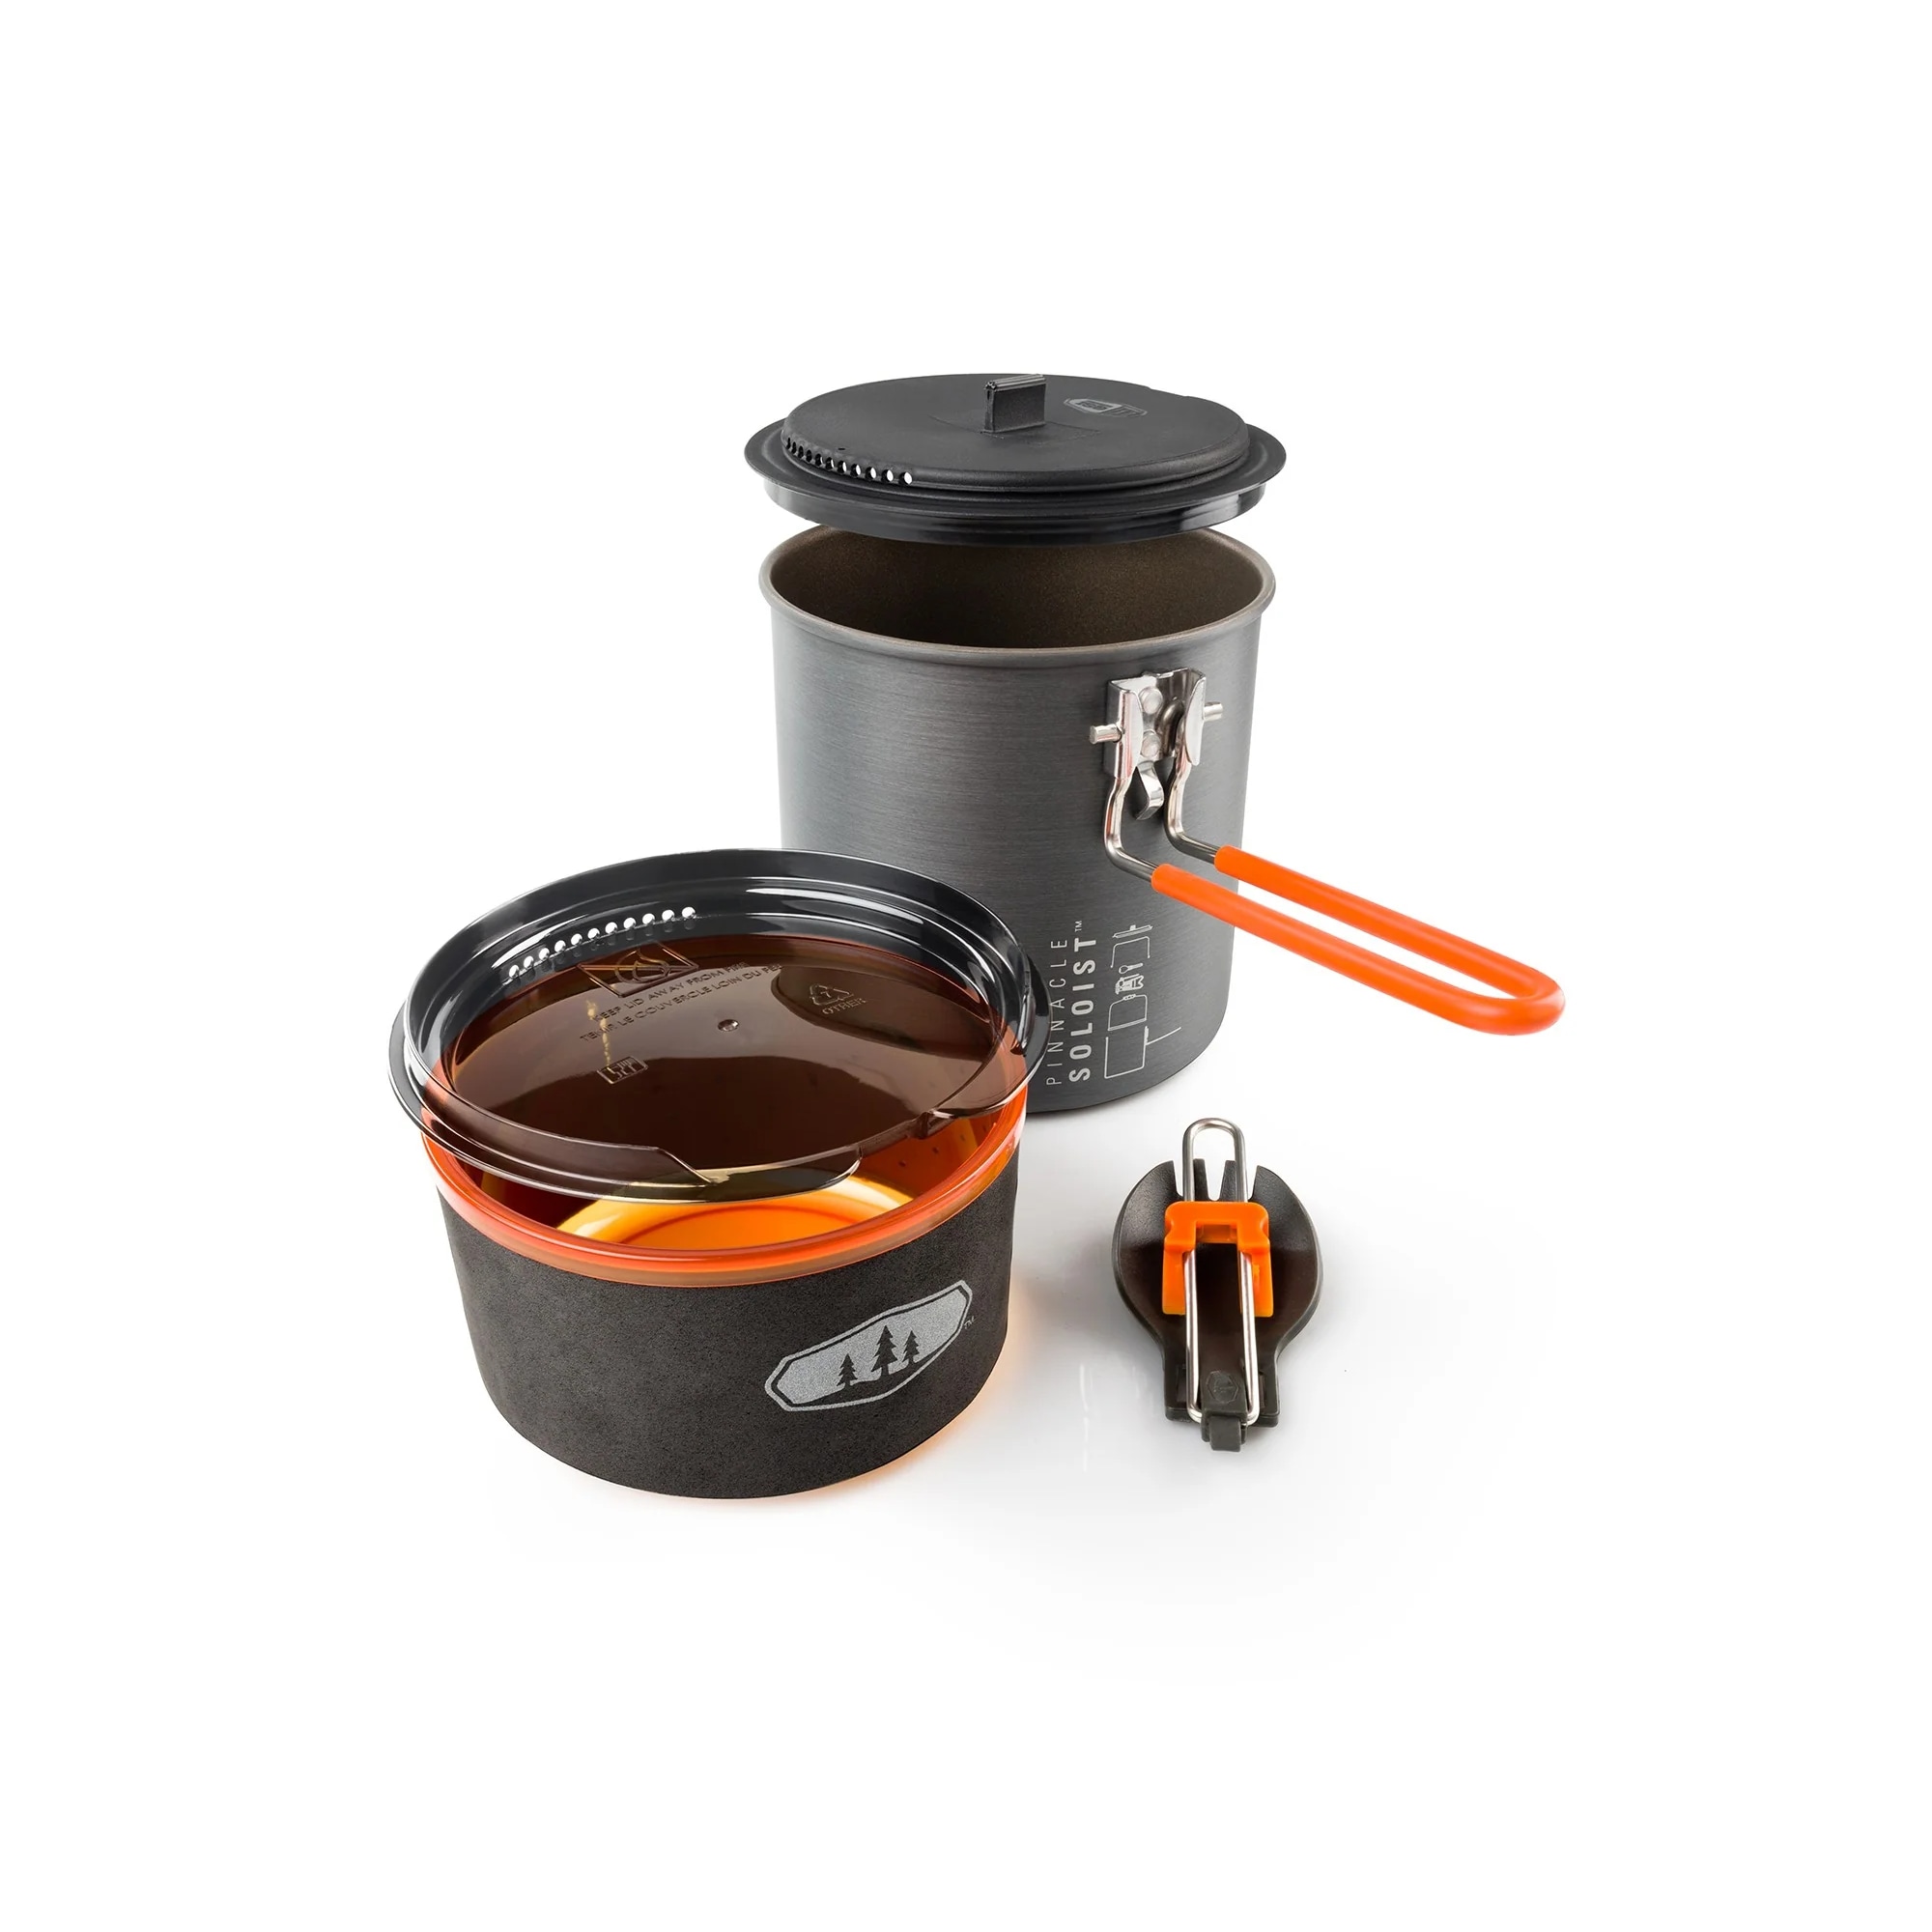 Pinnacle Soloist II 1 Person Cookset